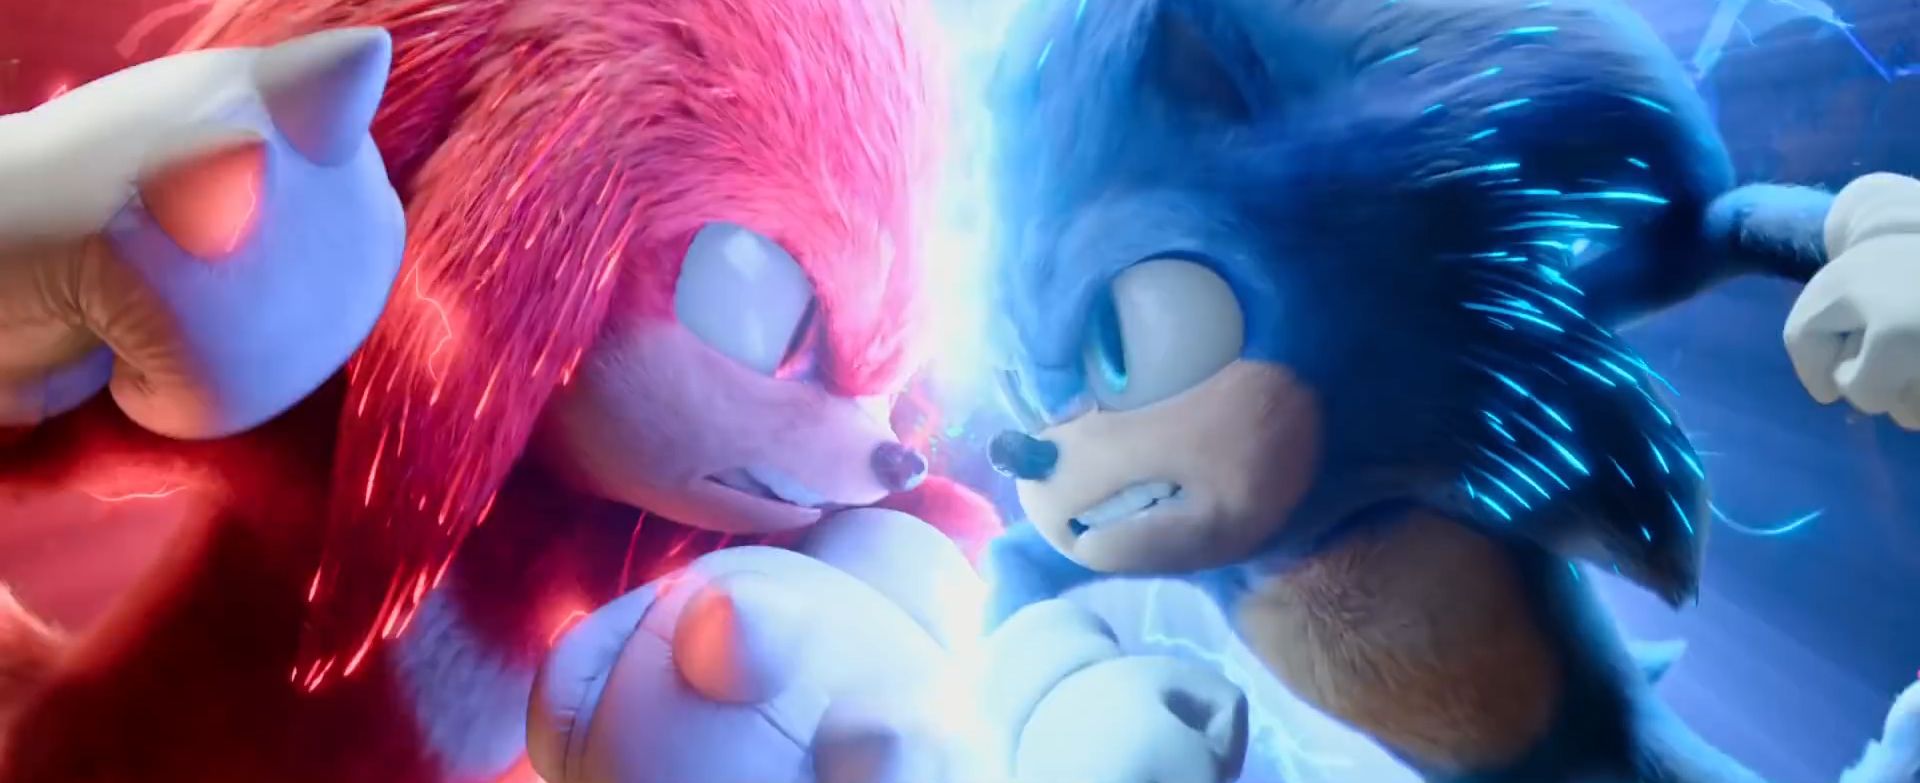 Sonic the Hedgehog 3 release date, cast and more